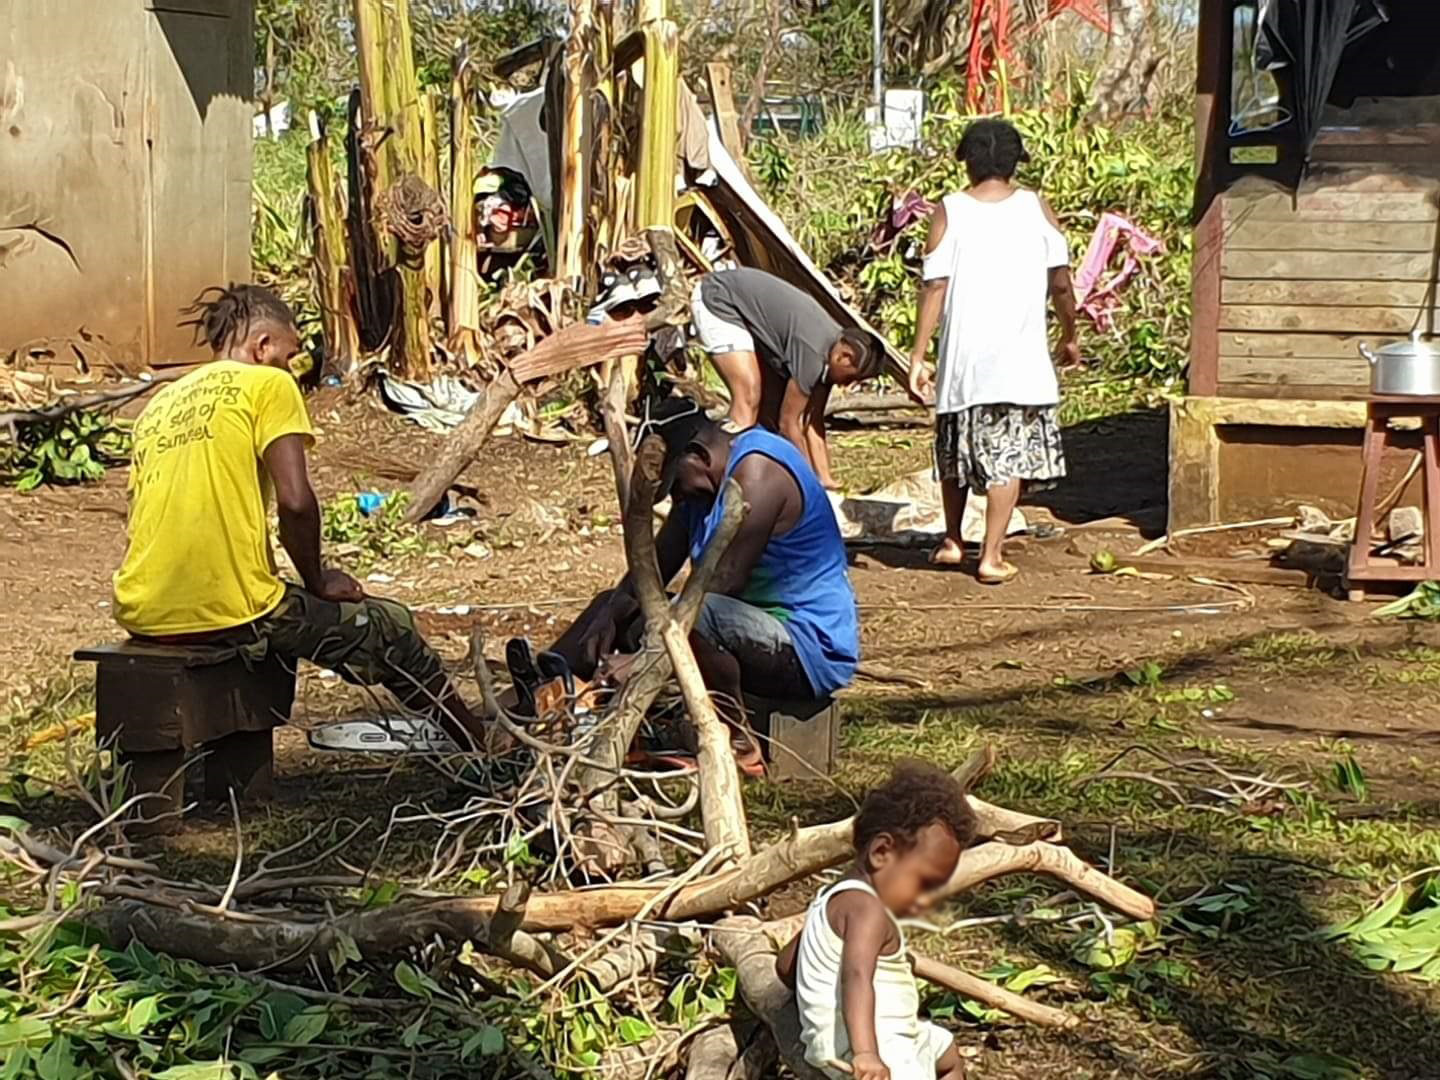 A clean up takes place following cyclone damage. © ACOM-Vanuatu. Used with permission.